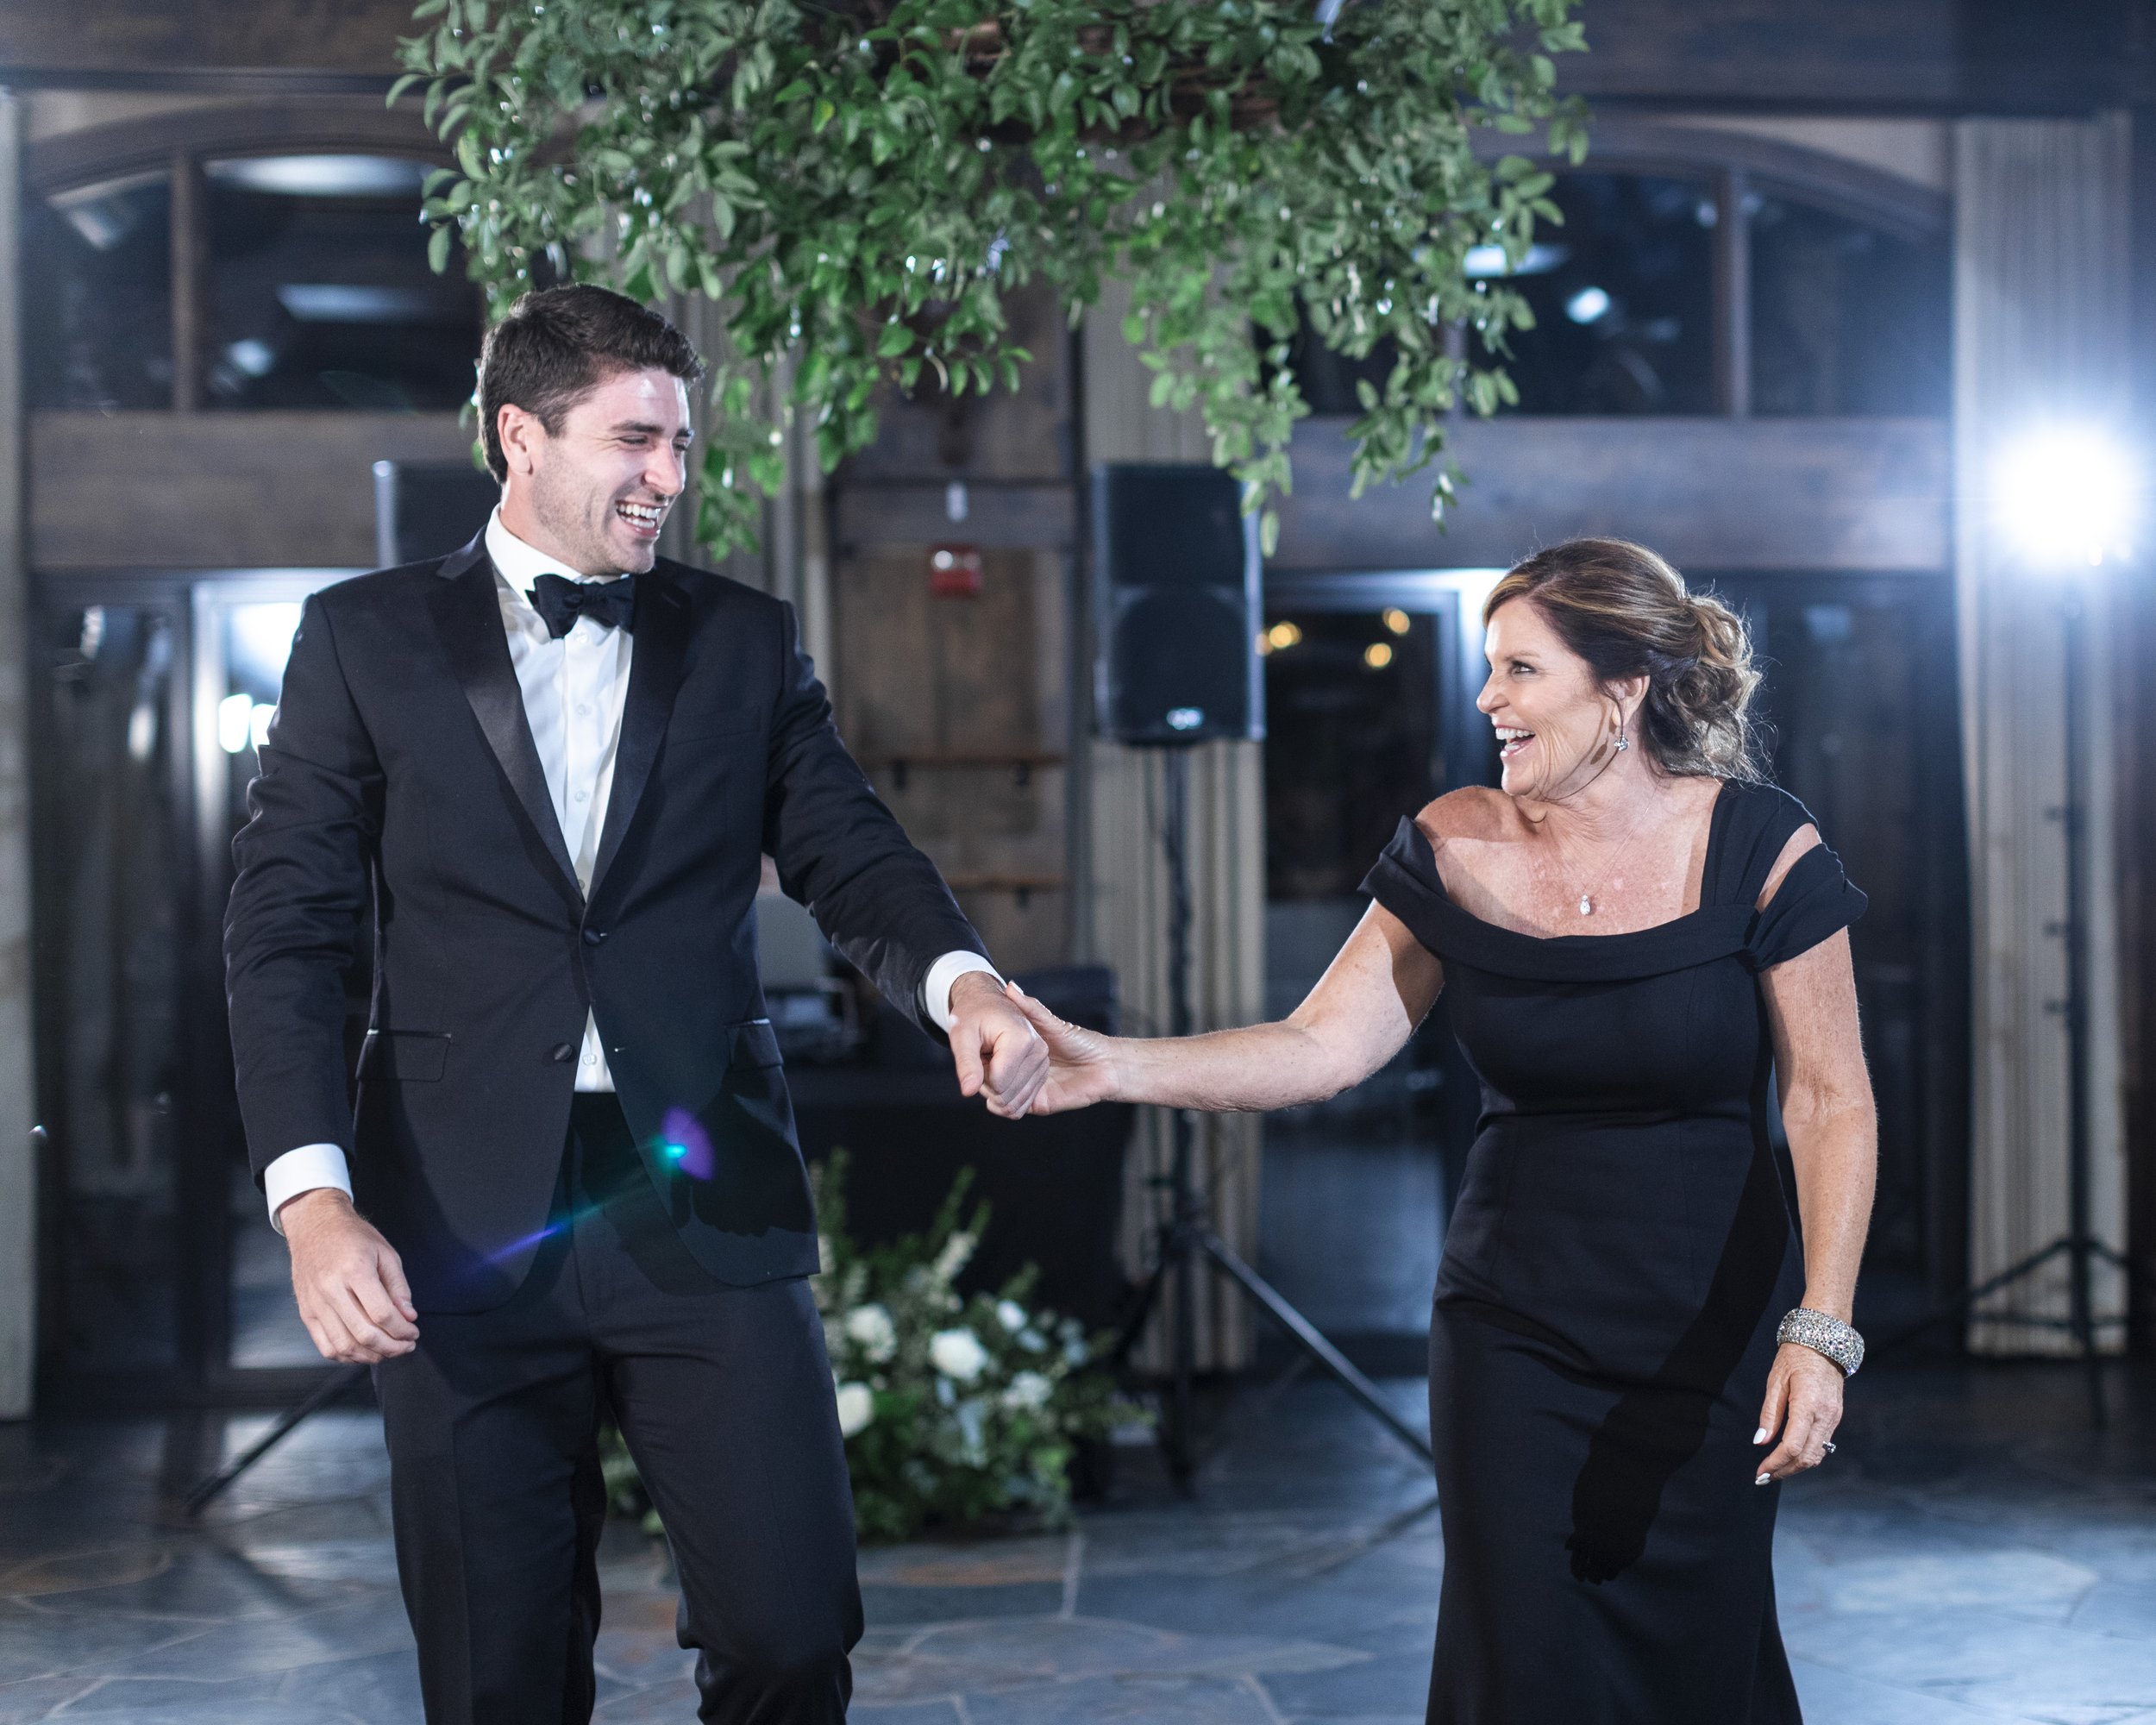  A groom leads his mother out onto the dance floor captured by wedding photographer Savanna Richardson Photography. Lake Tahoe wedding photographers #savannarichardsonphotography #tahoewedding #lakesidewedding #outdoorwedding #summerwedding #laketaho